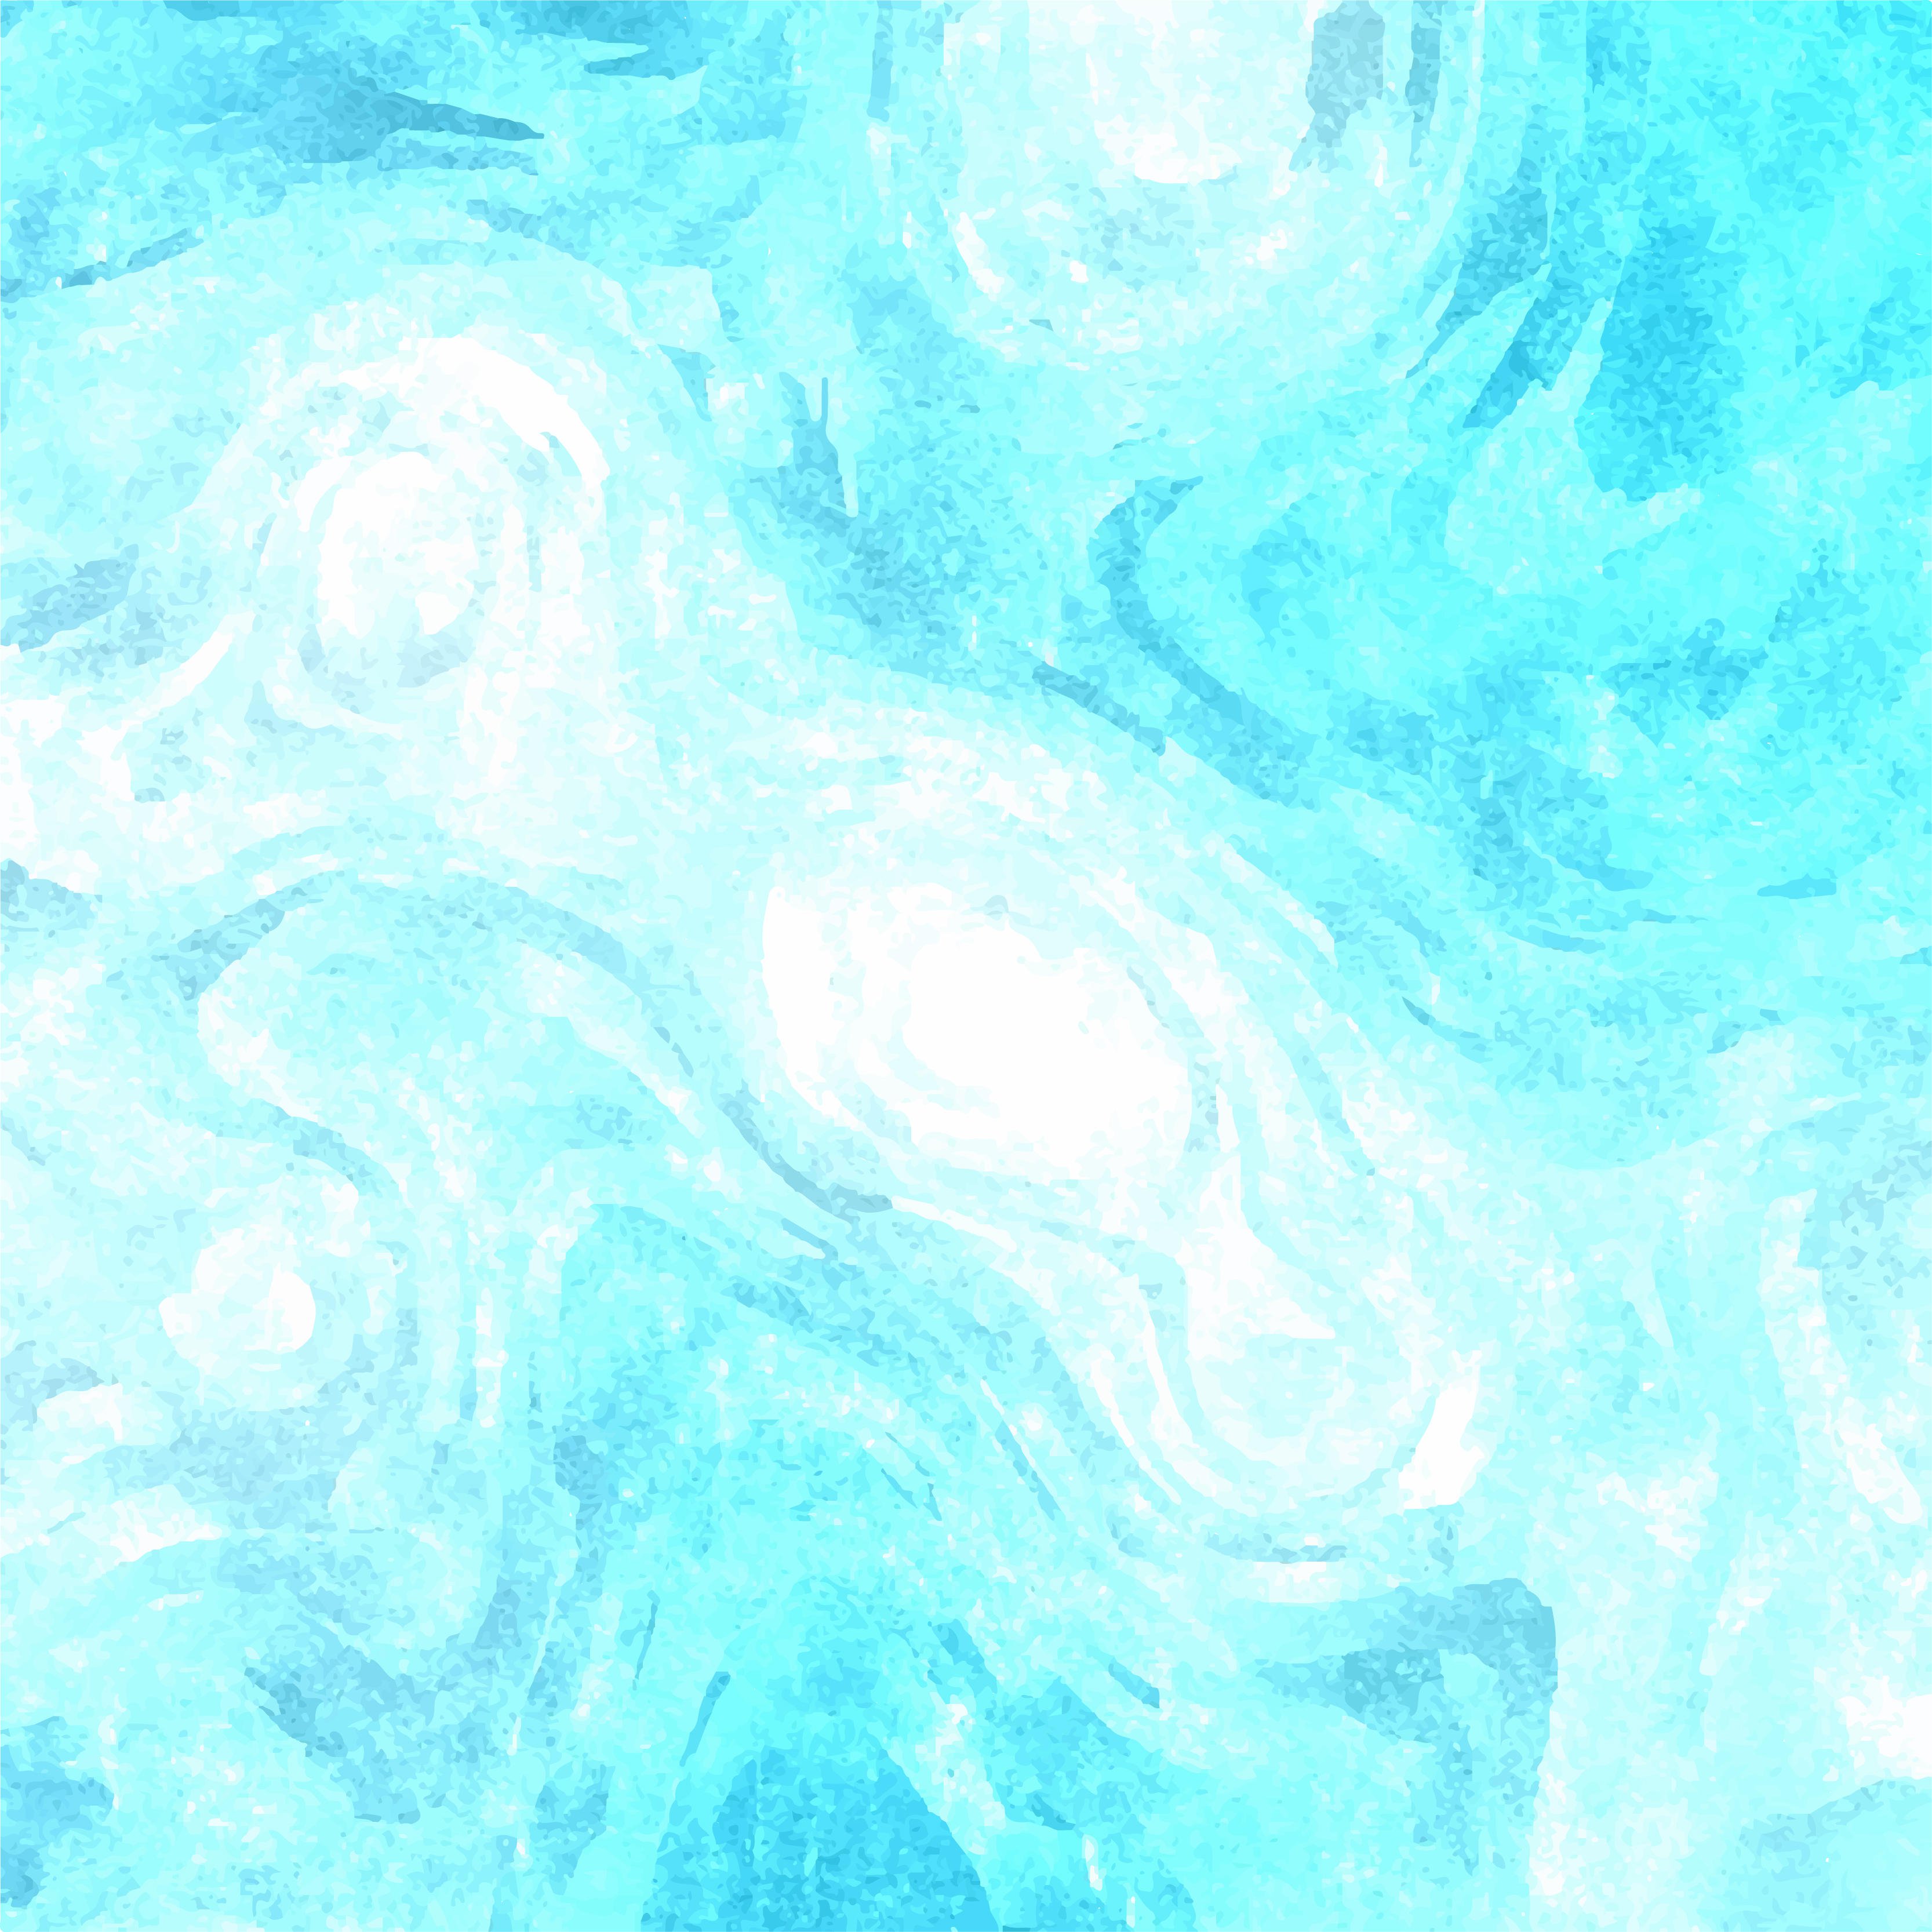 Watercolor Background Patterns Pictures To